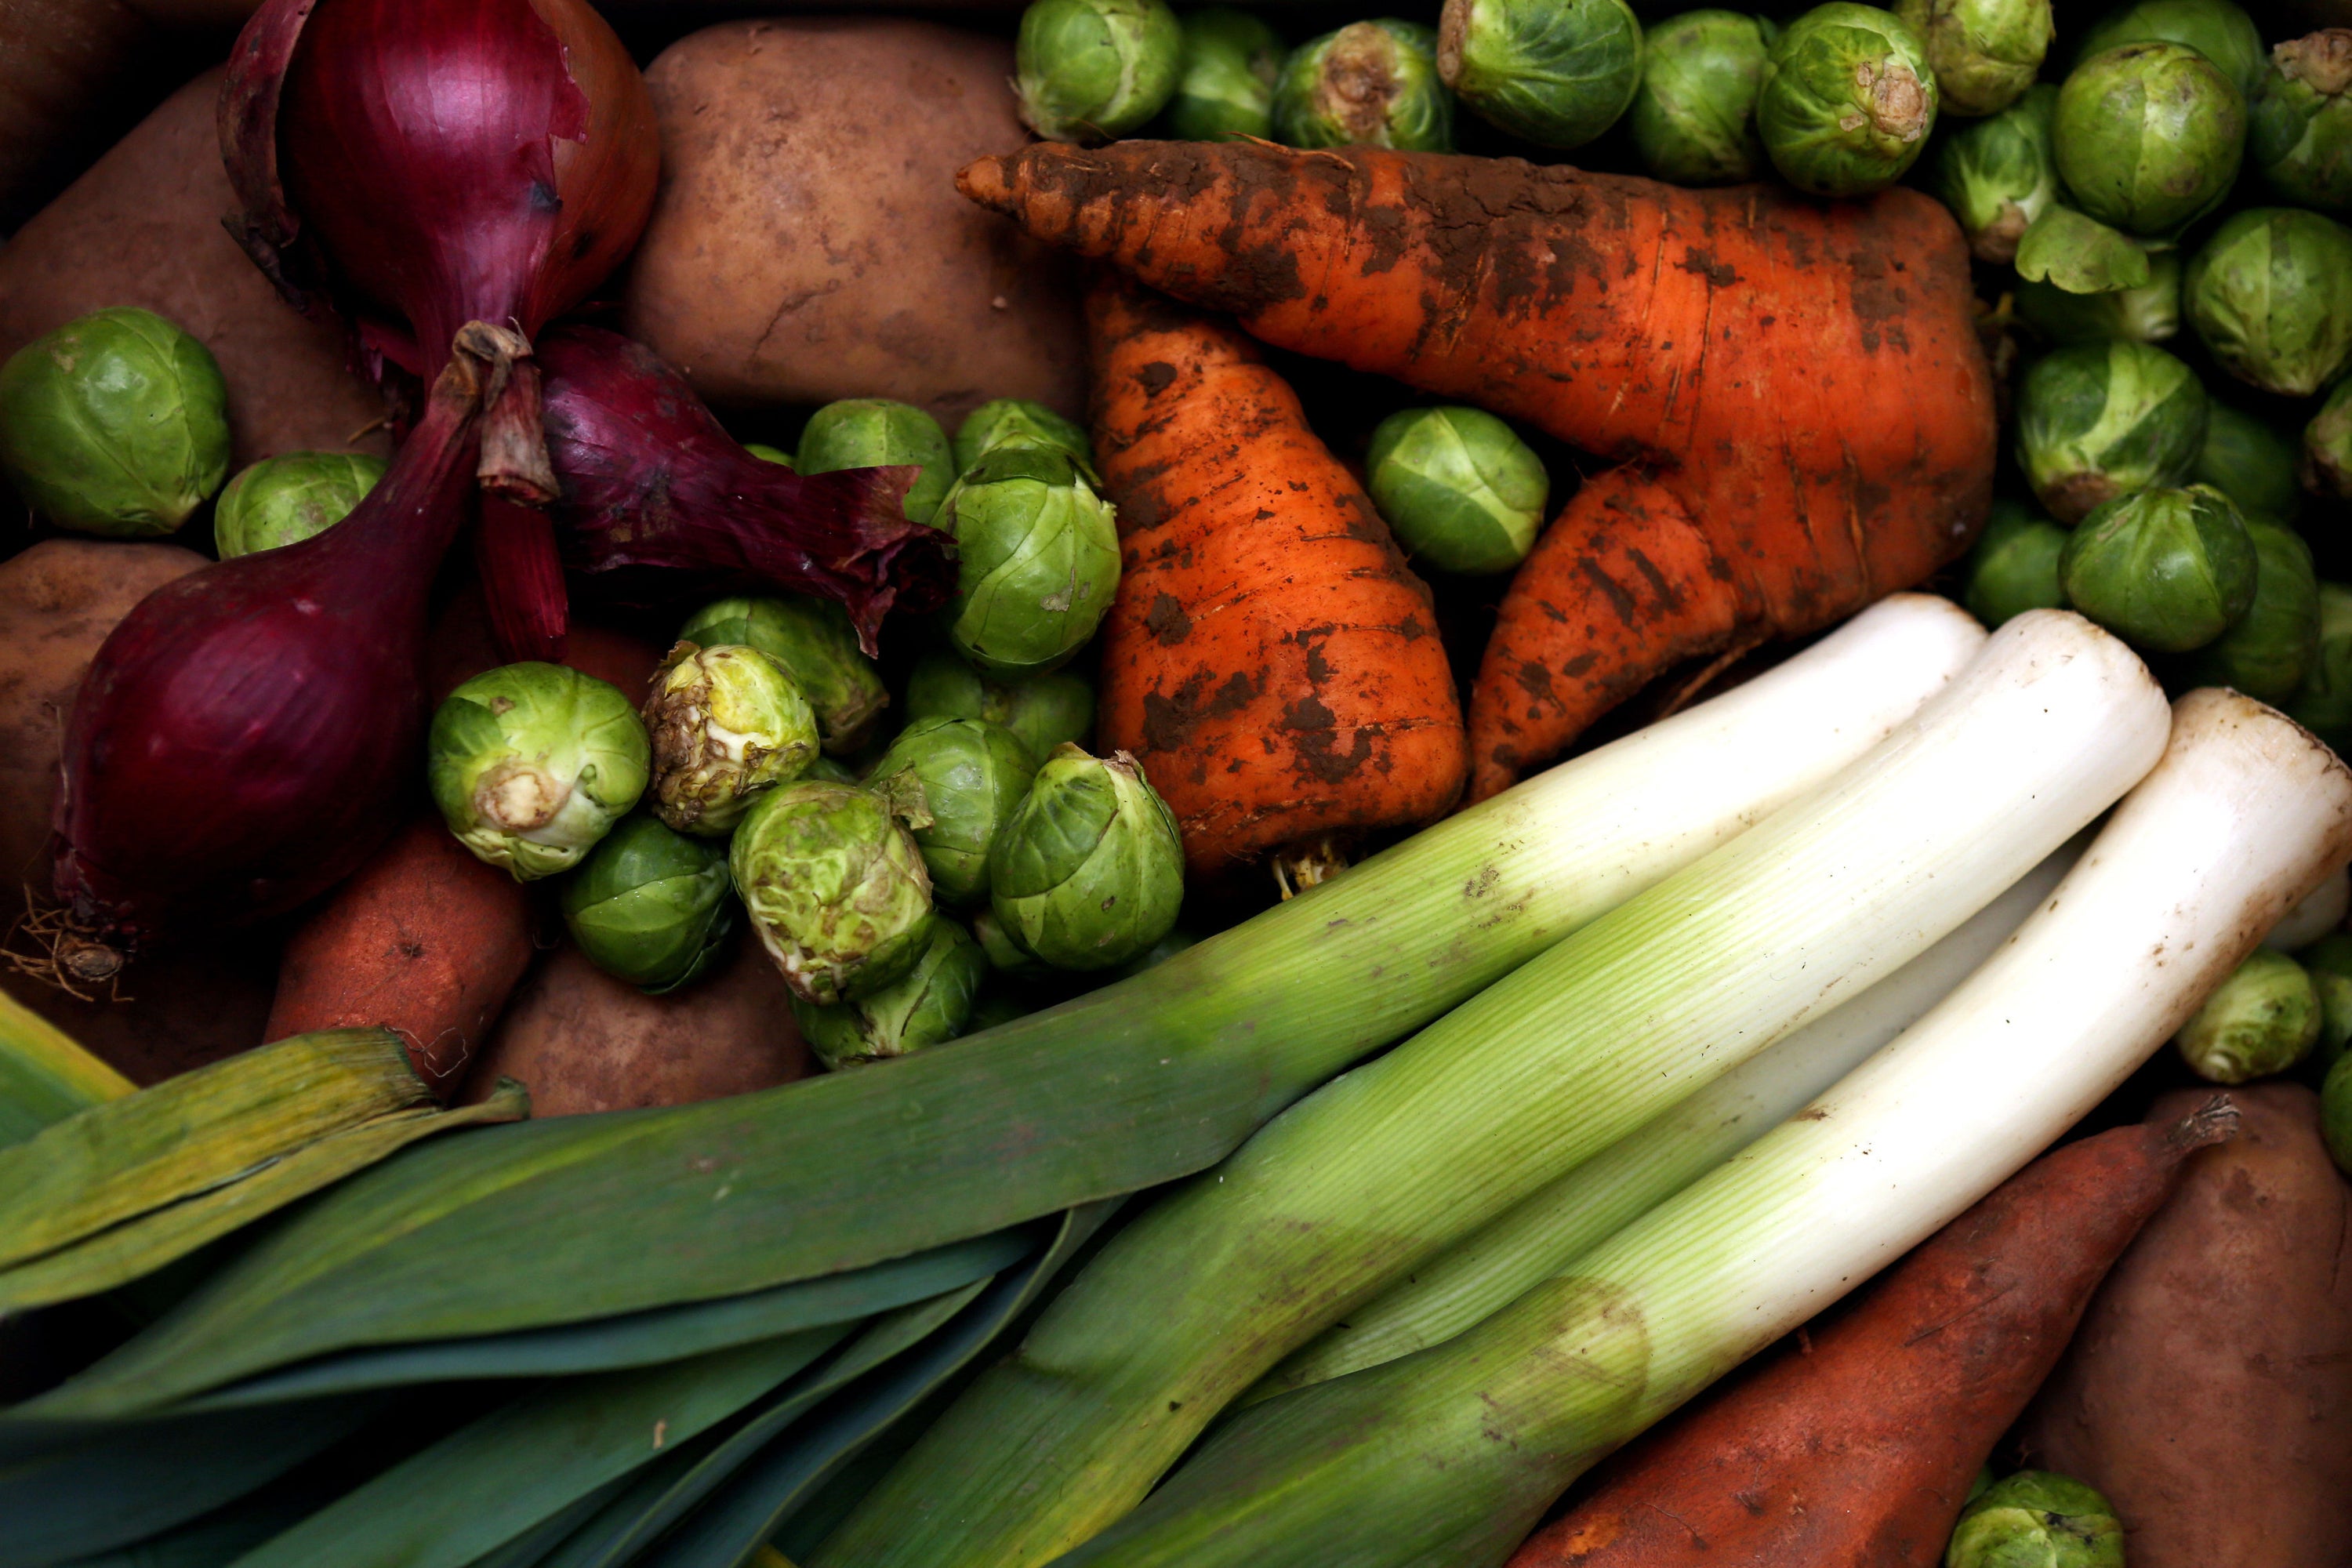 Cost-of-living crisis 'could help veg sales', Article